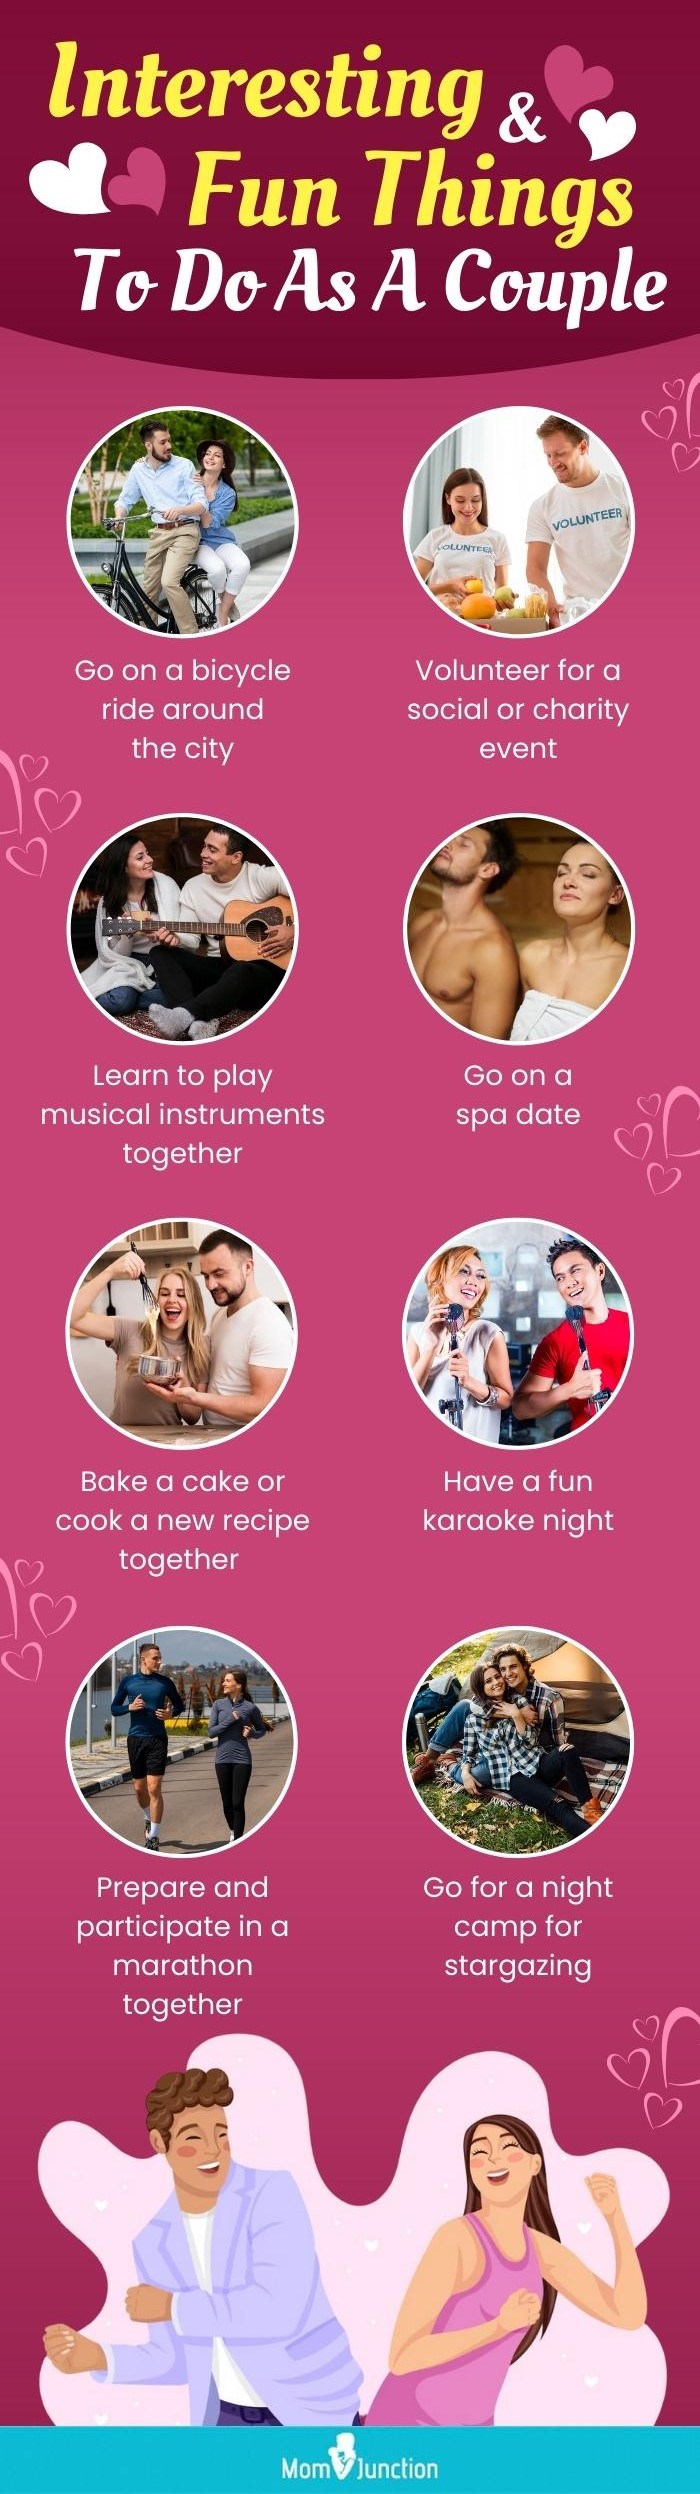 interesting and fun things to do as a couple (infographic)